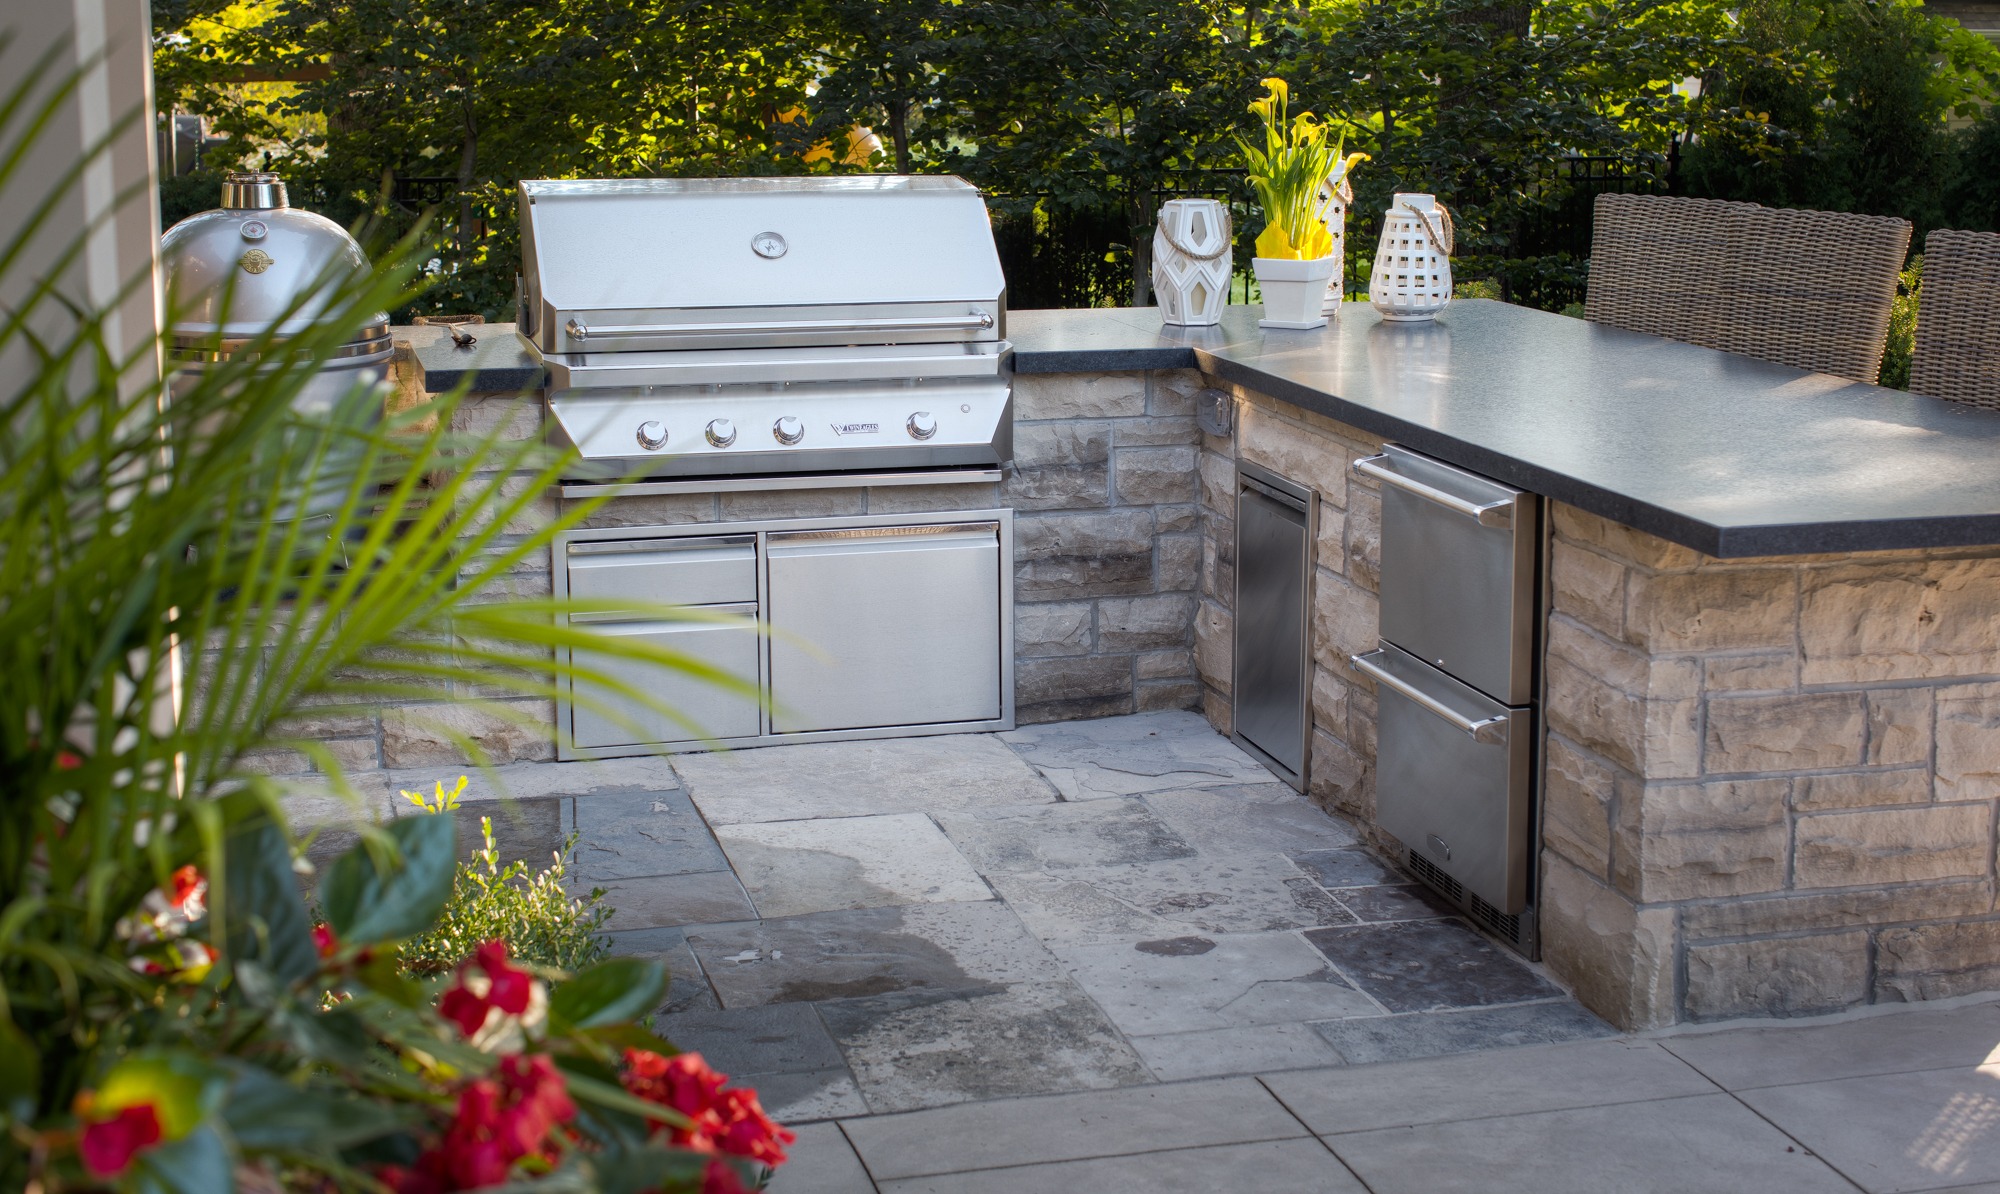 An outdoor kitchen with a built-in grill and refrigerator, set in stone counters, surrounded by greenery, flowers in the foreground, on a sunny day.